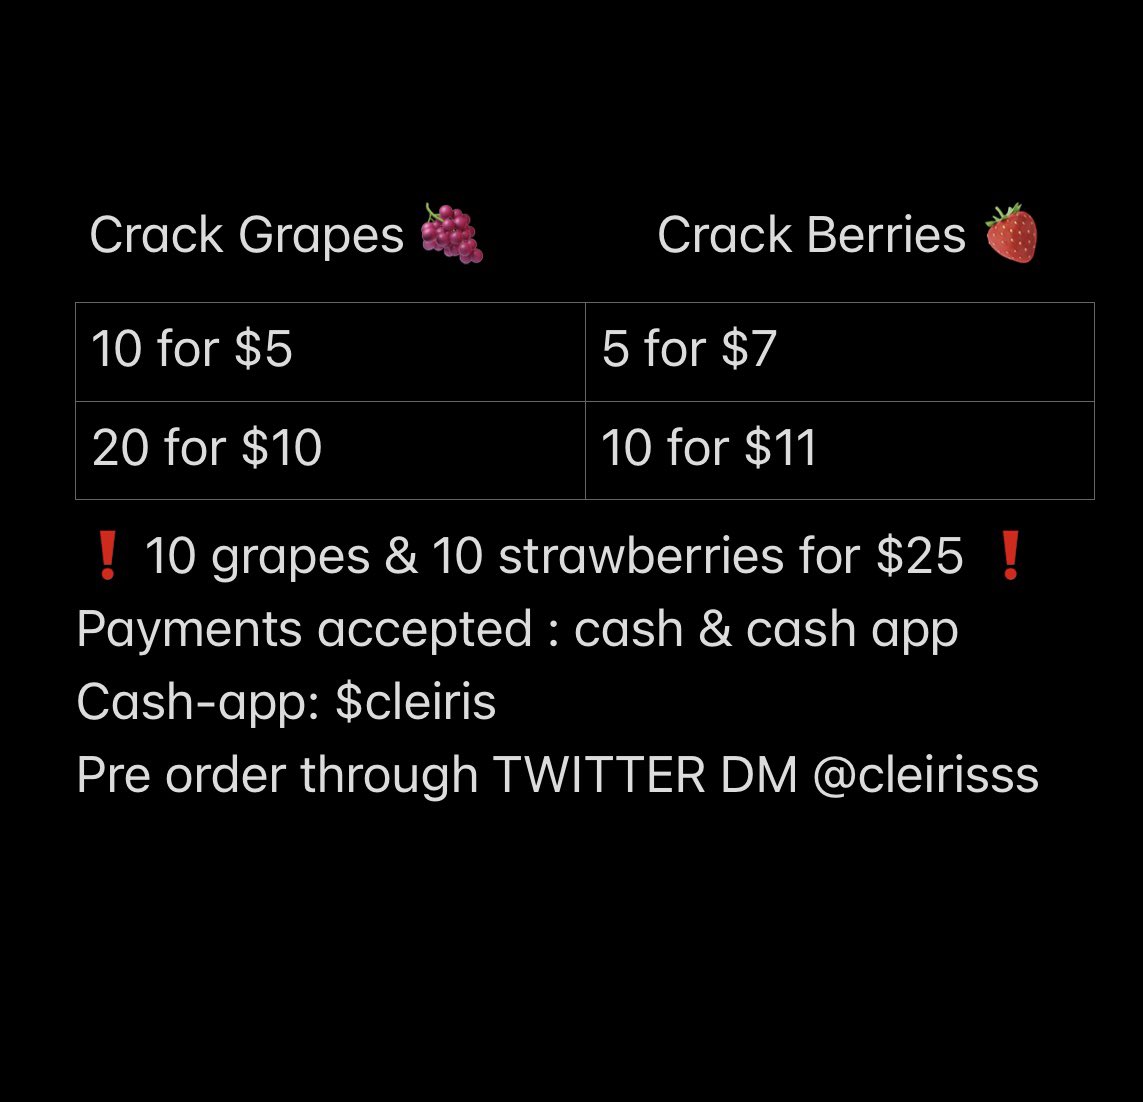 ❗️VALDOSTA STATE IM BACK ❗️
Tell a friend to tell a friend! 
DM to pre order for SATURDAY 2/20. 
#valdostastate #vsu21 #vsu22 #vsu23 #vsu24 #valdostacrackgrapes #crackgrapes